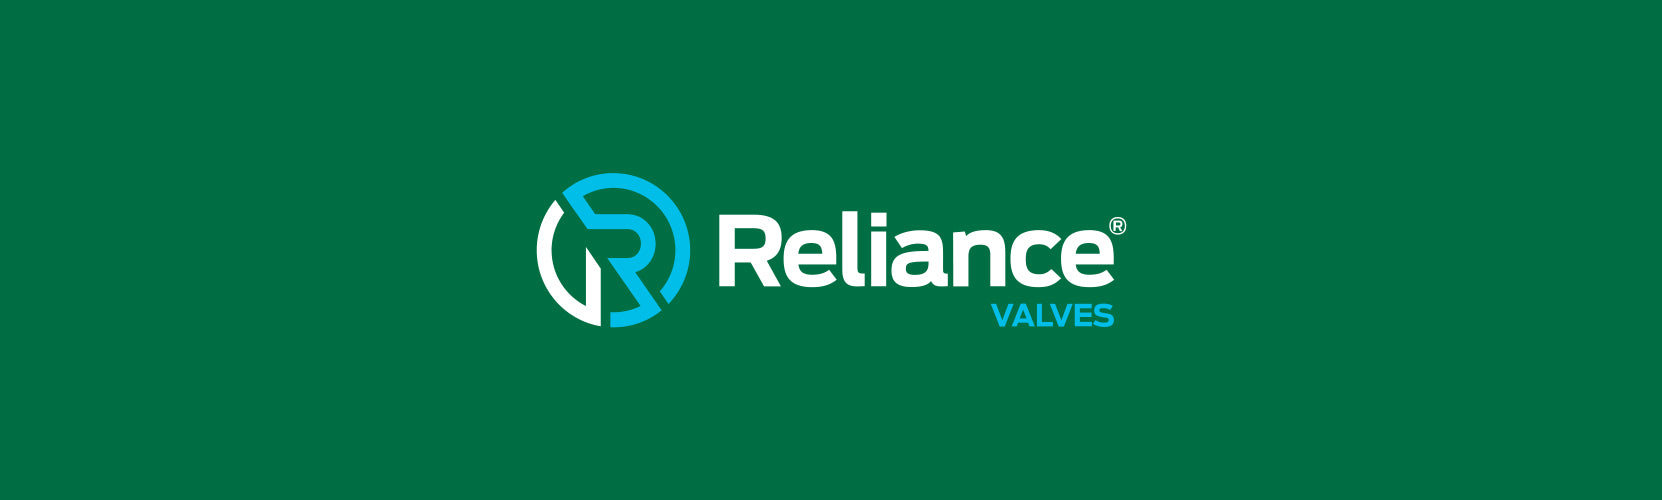 Reliance Water Controls (RWC) valves available from Safety Valves Online